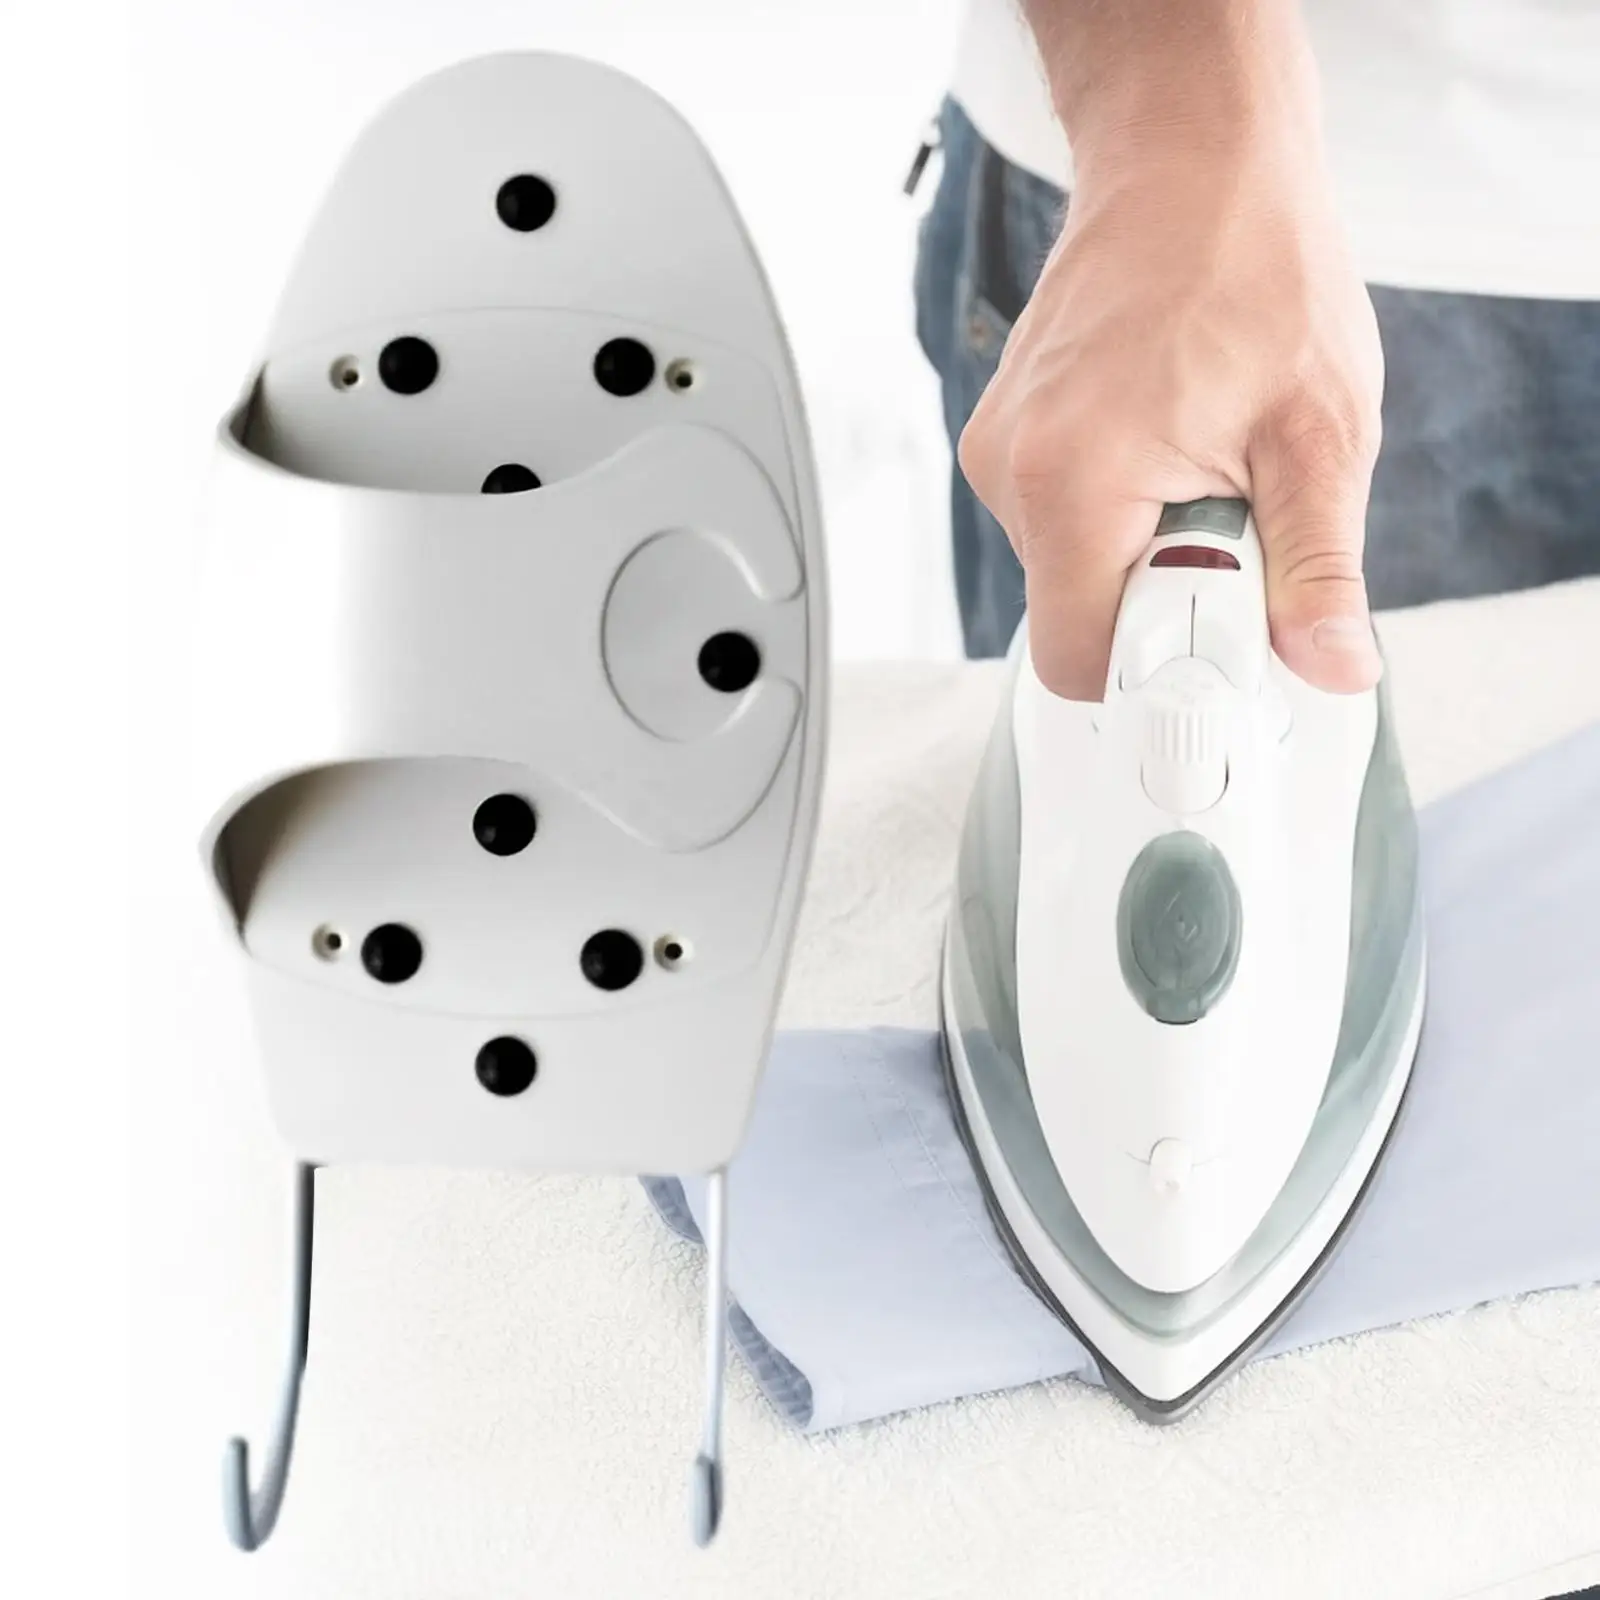 Ironing Board Holder Easy to Install with Hooks Organizer Compact Iron Hanger for Laundry Room Door Household Cabinet Bathroom